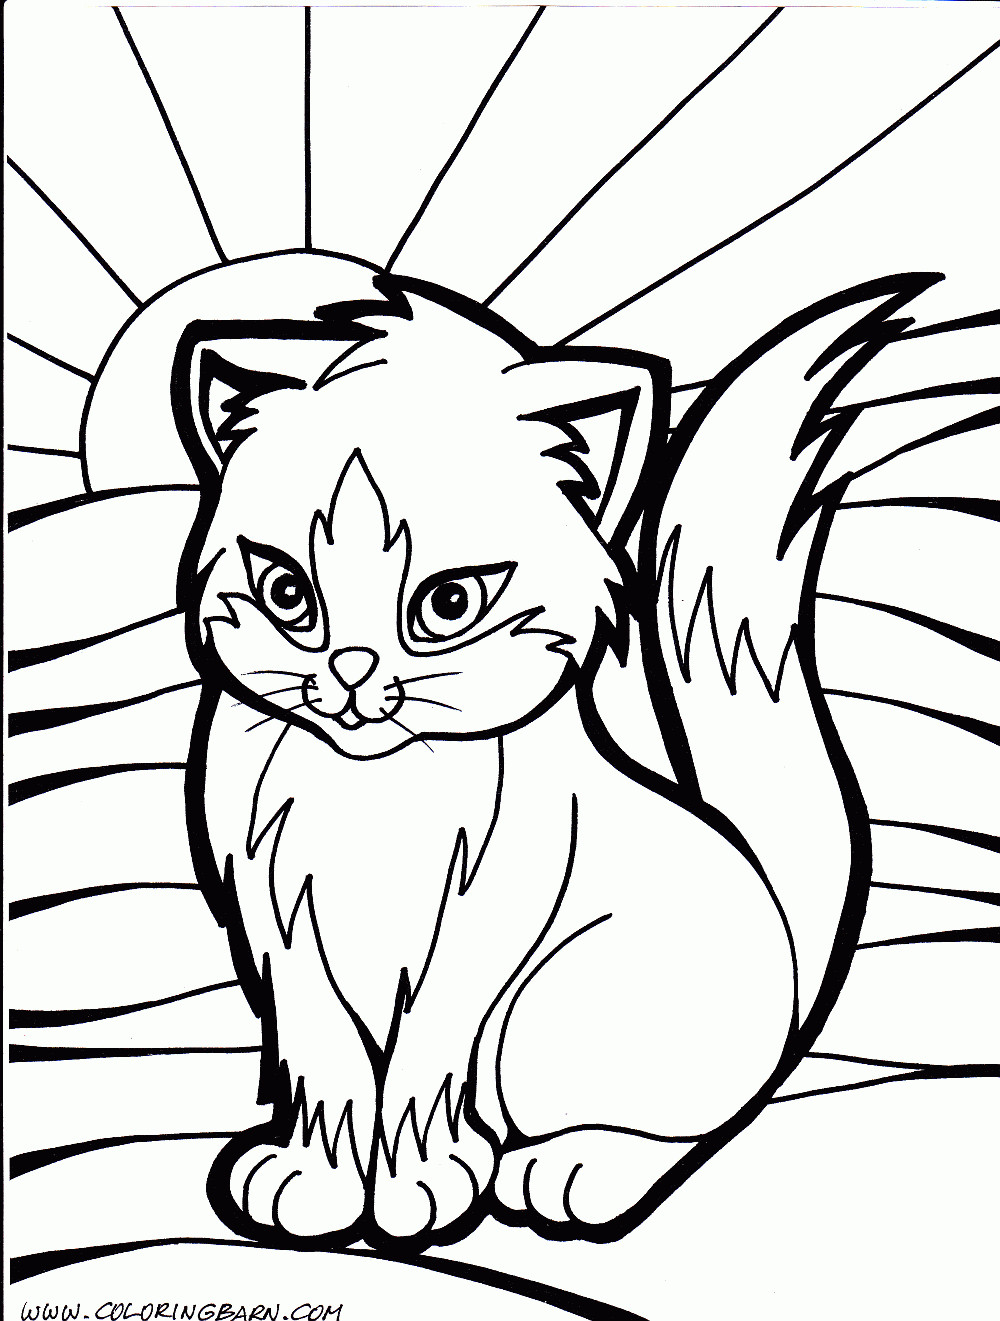 Cat Coloring Pages Printable
 Cat And Dog Realistic Coloring Pages Powerballforlife